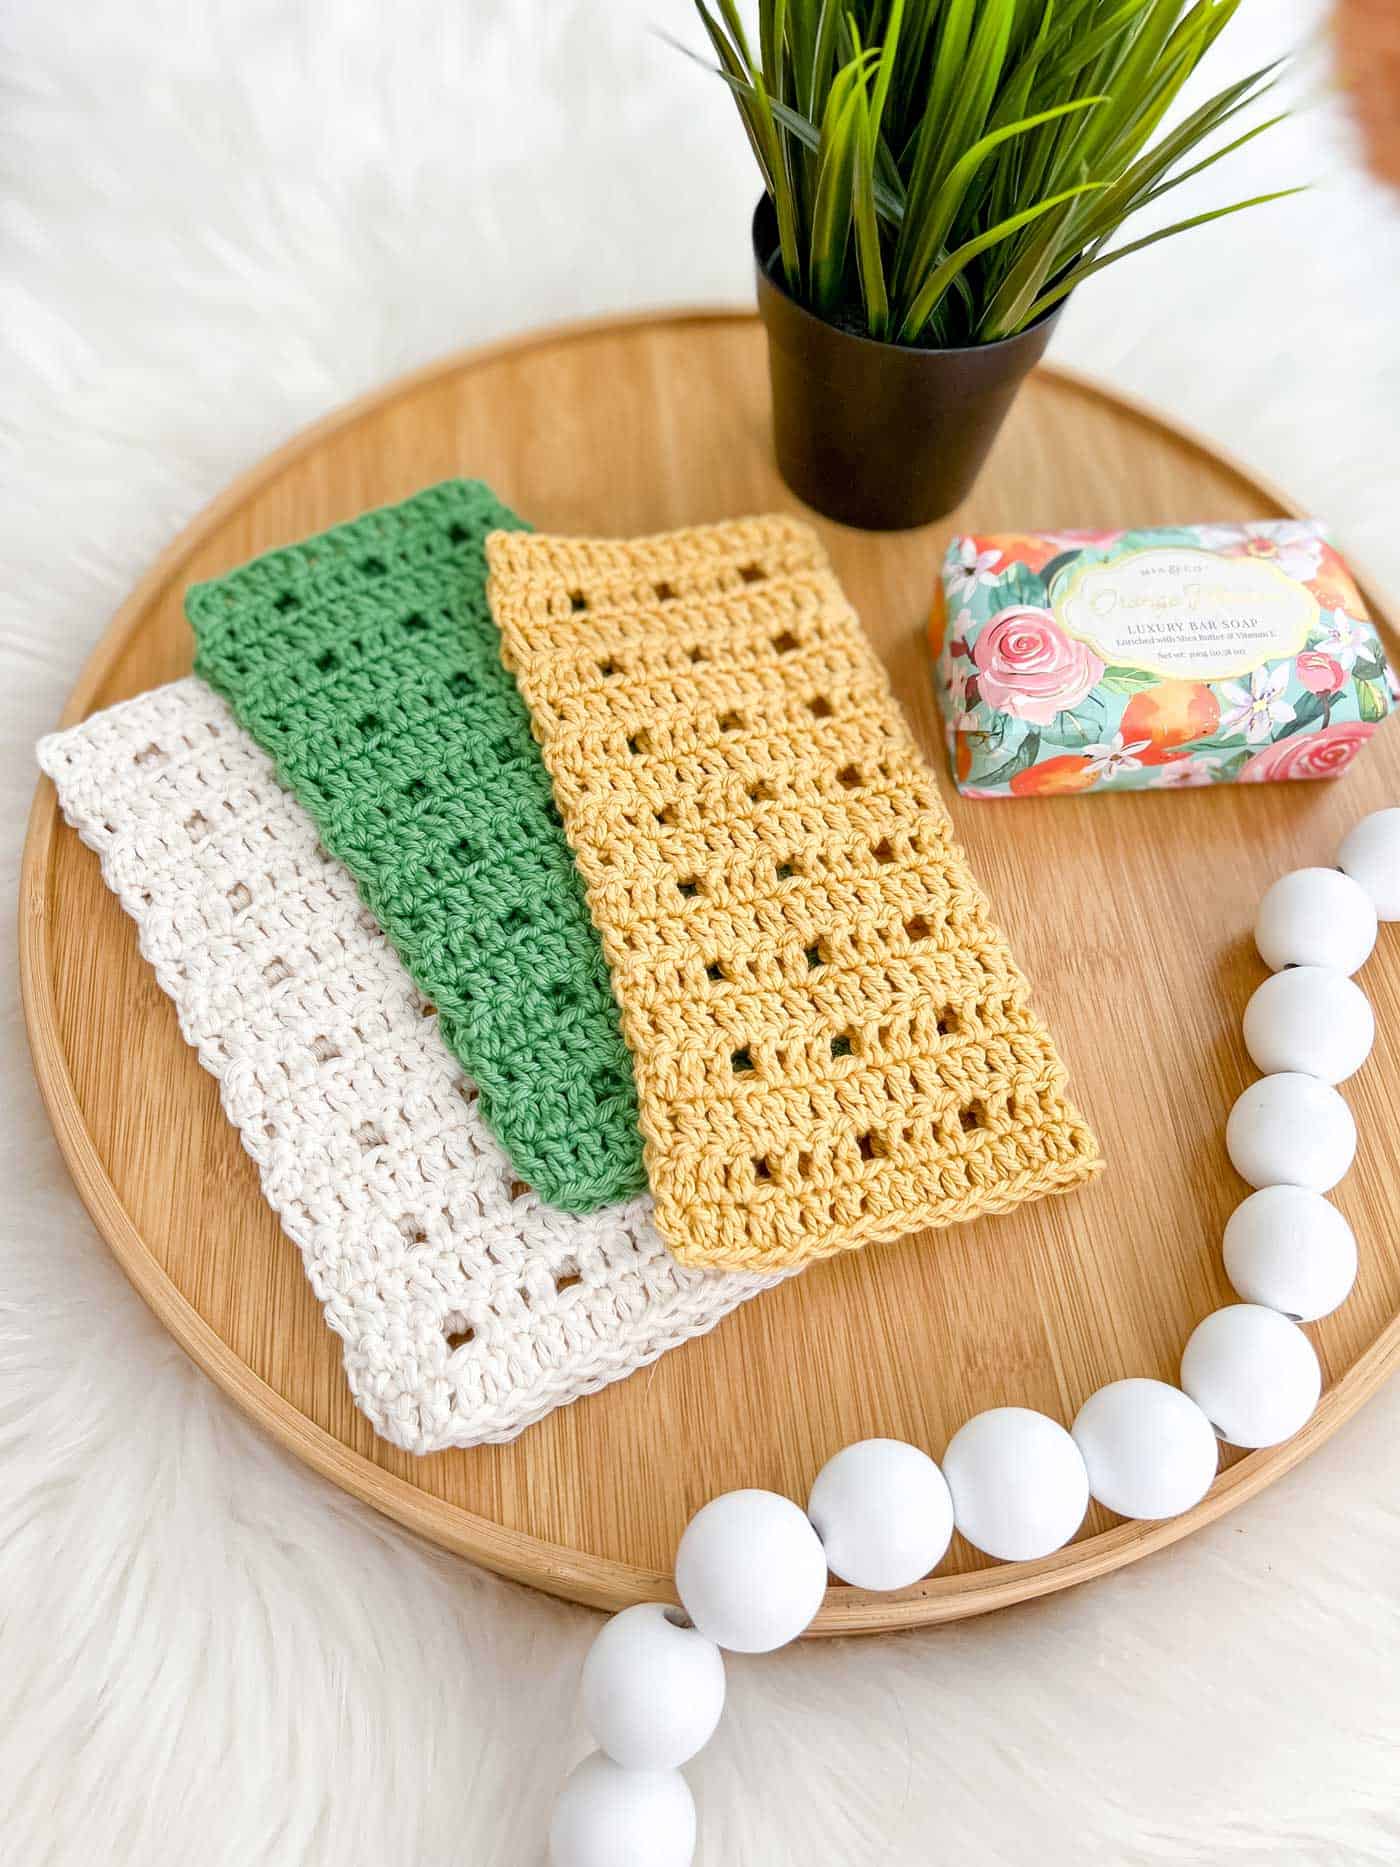 Easy Crochet Dishcloth / Washcloth : 9 Steps (with Pictures) - Instructables